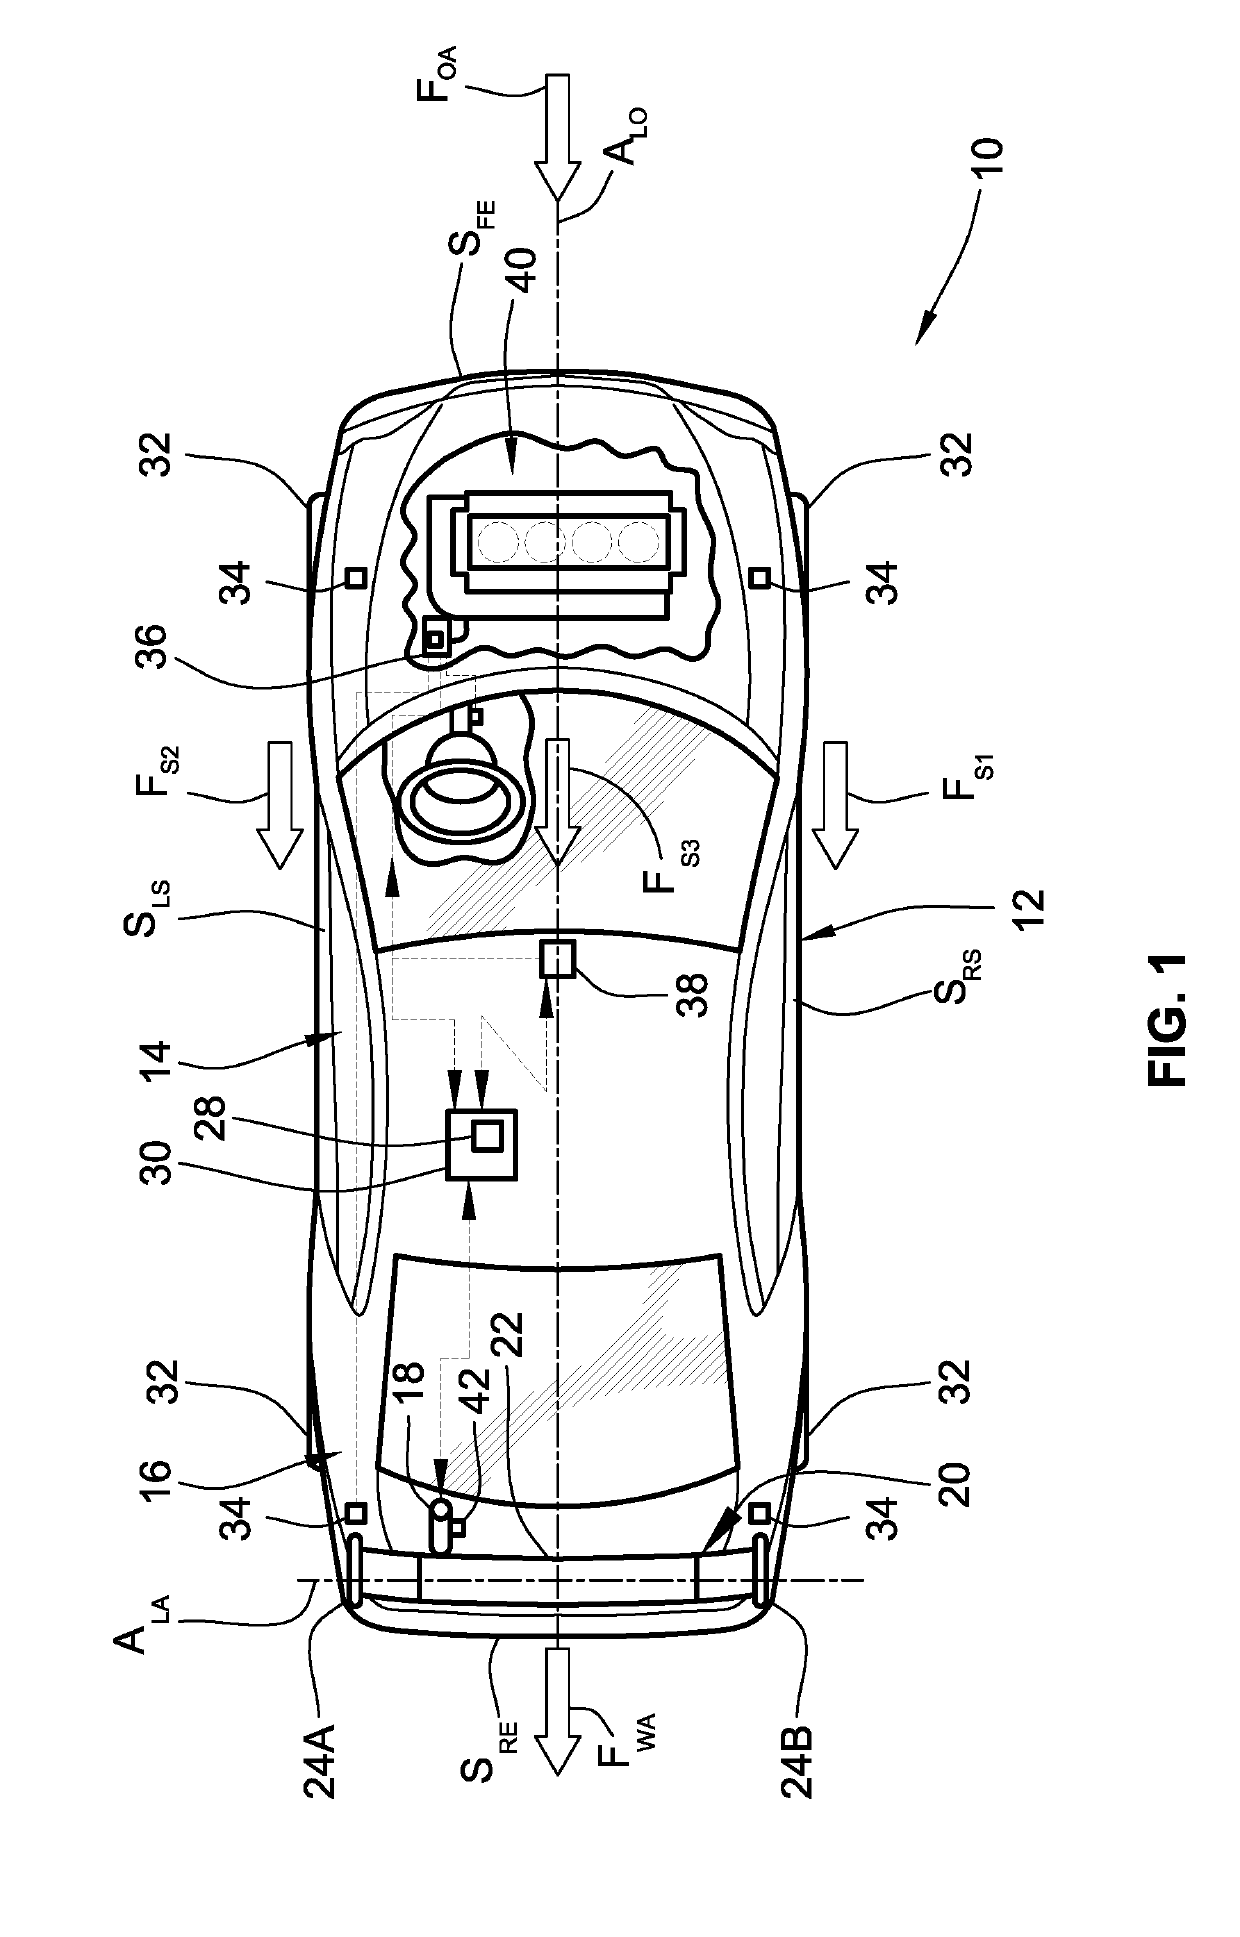 Downforce feedback systems and control logic for active aerodynamic devices of motor vehicles